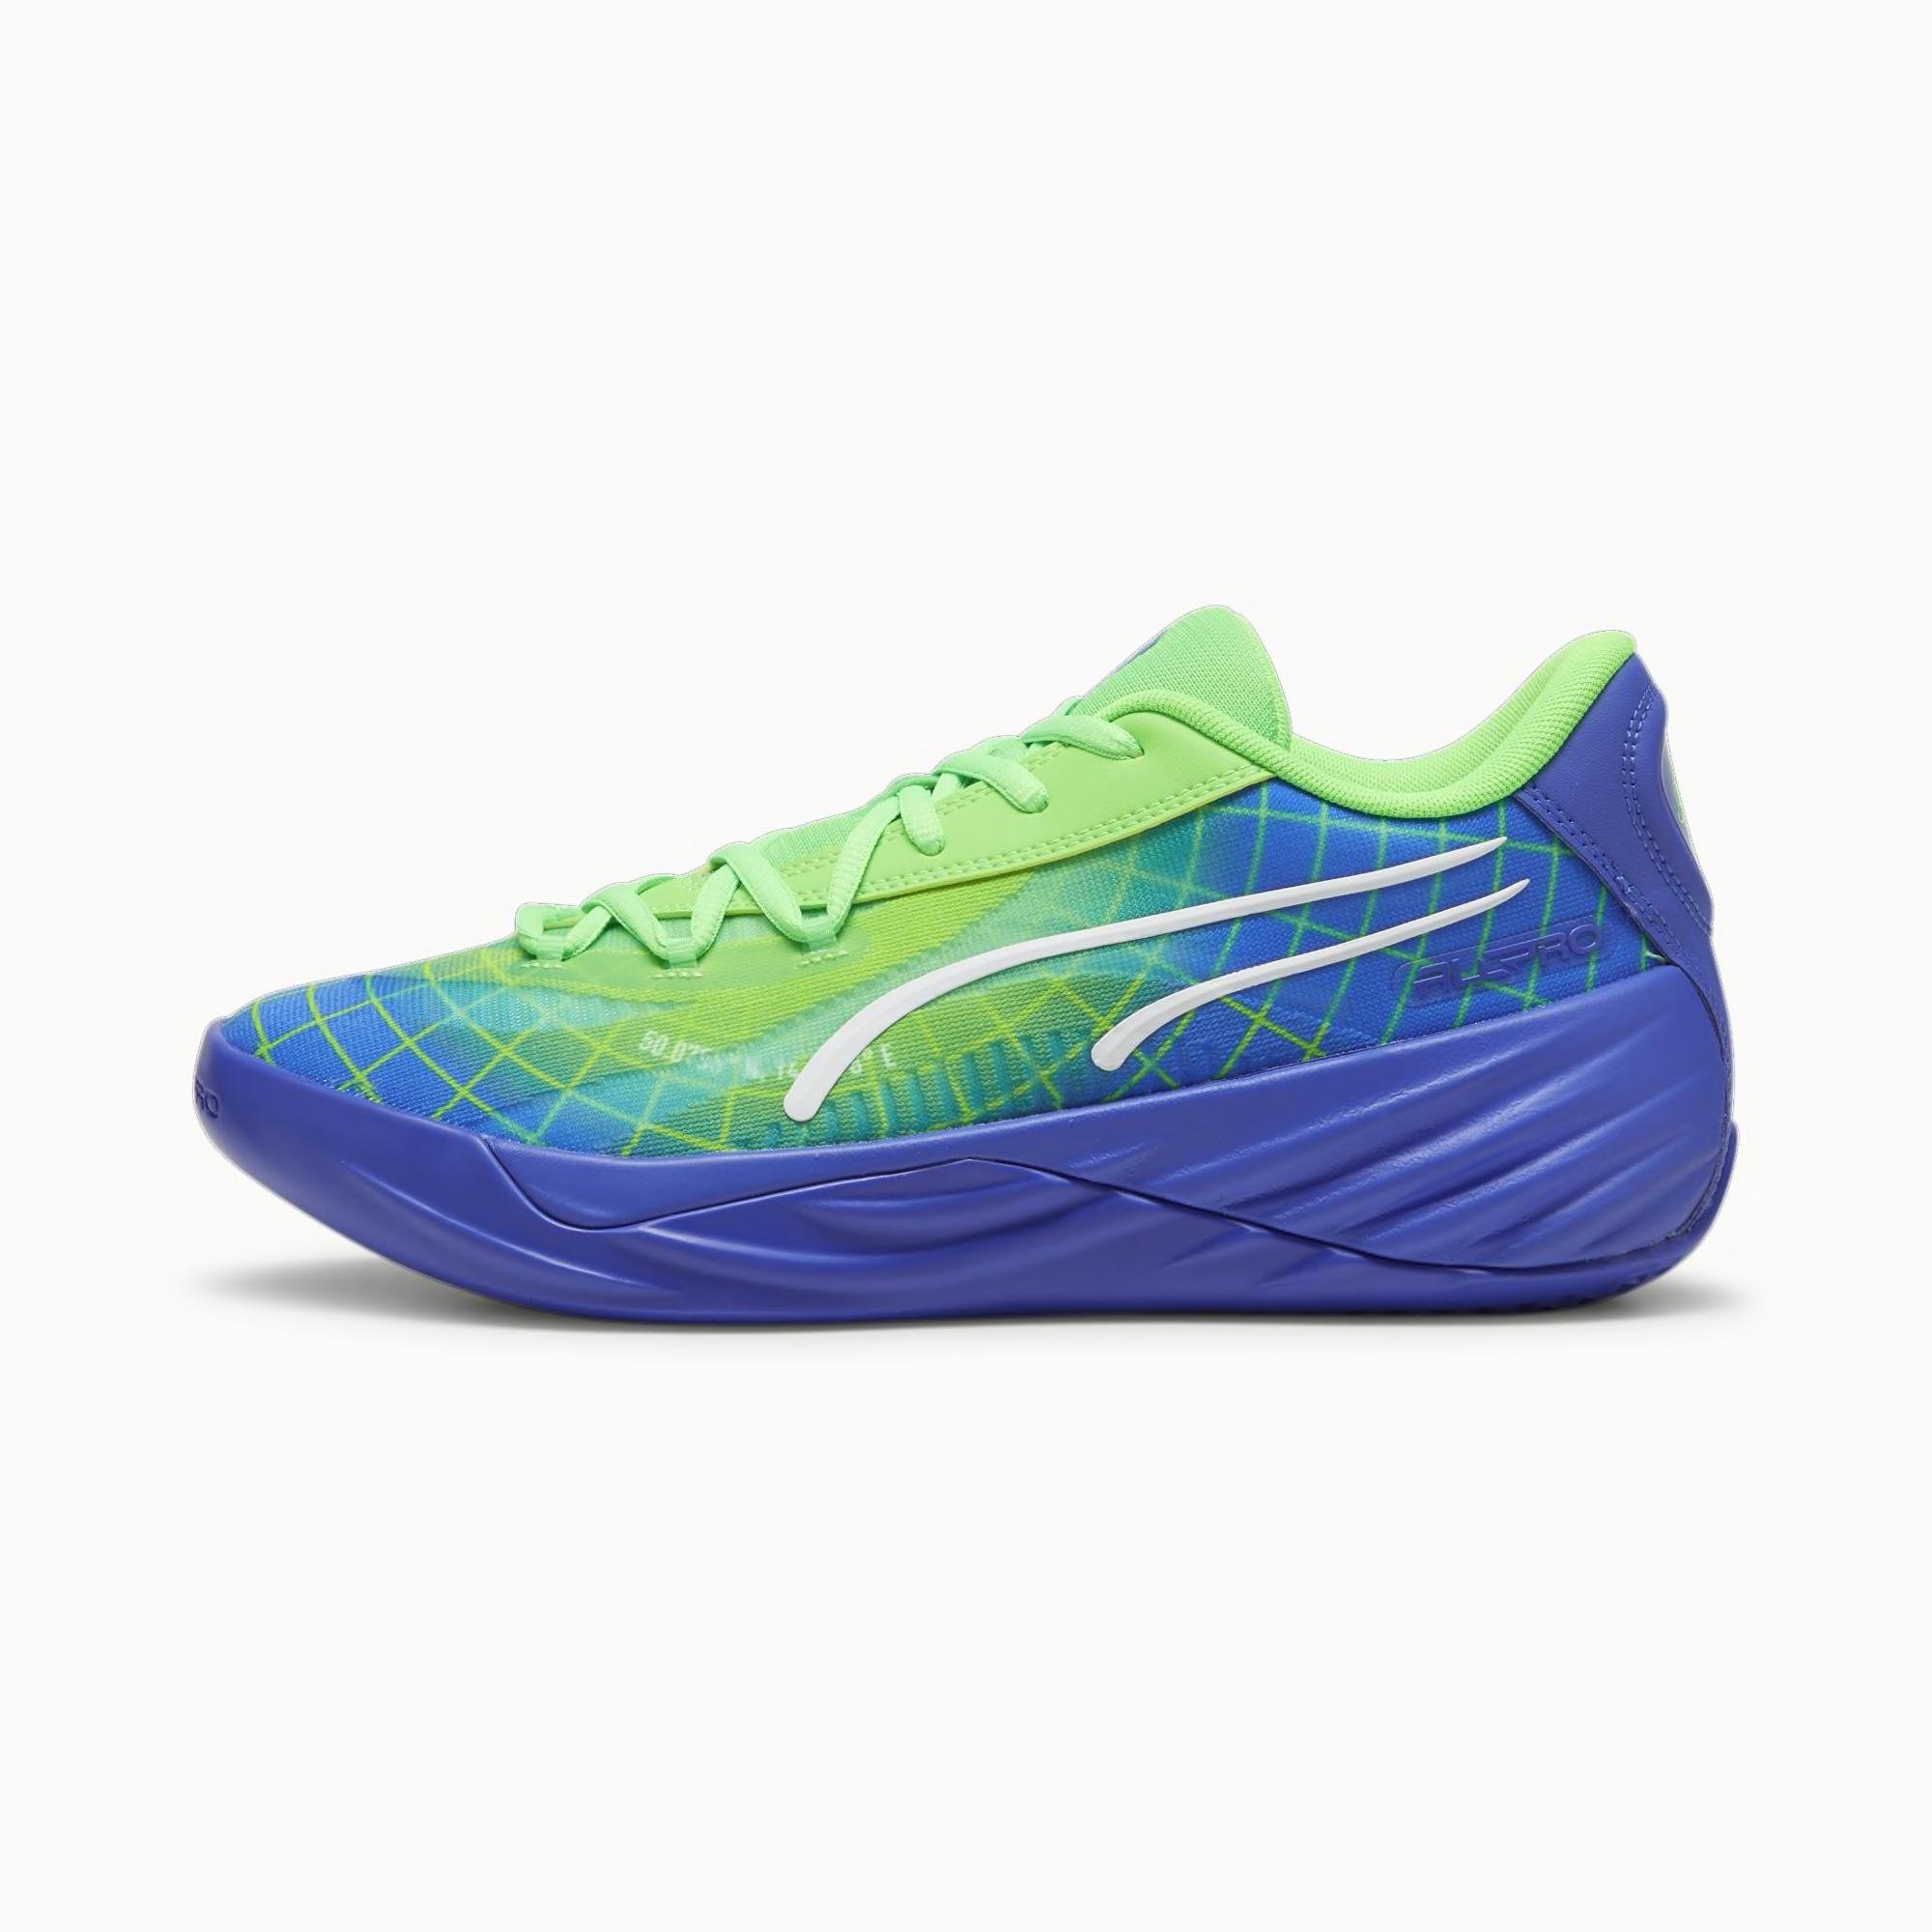 All-Pro NITRO™ Marcus Smart Men's Basketball Shoes by PUMA